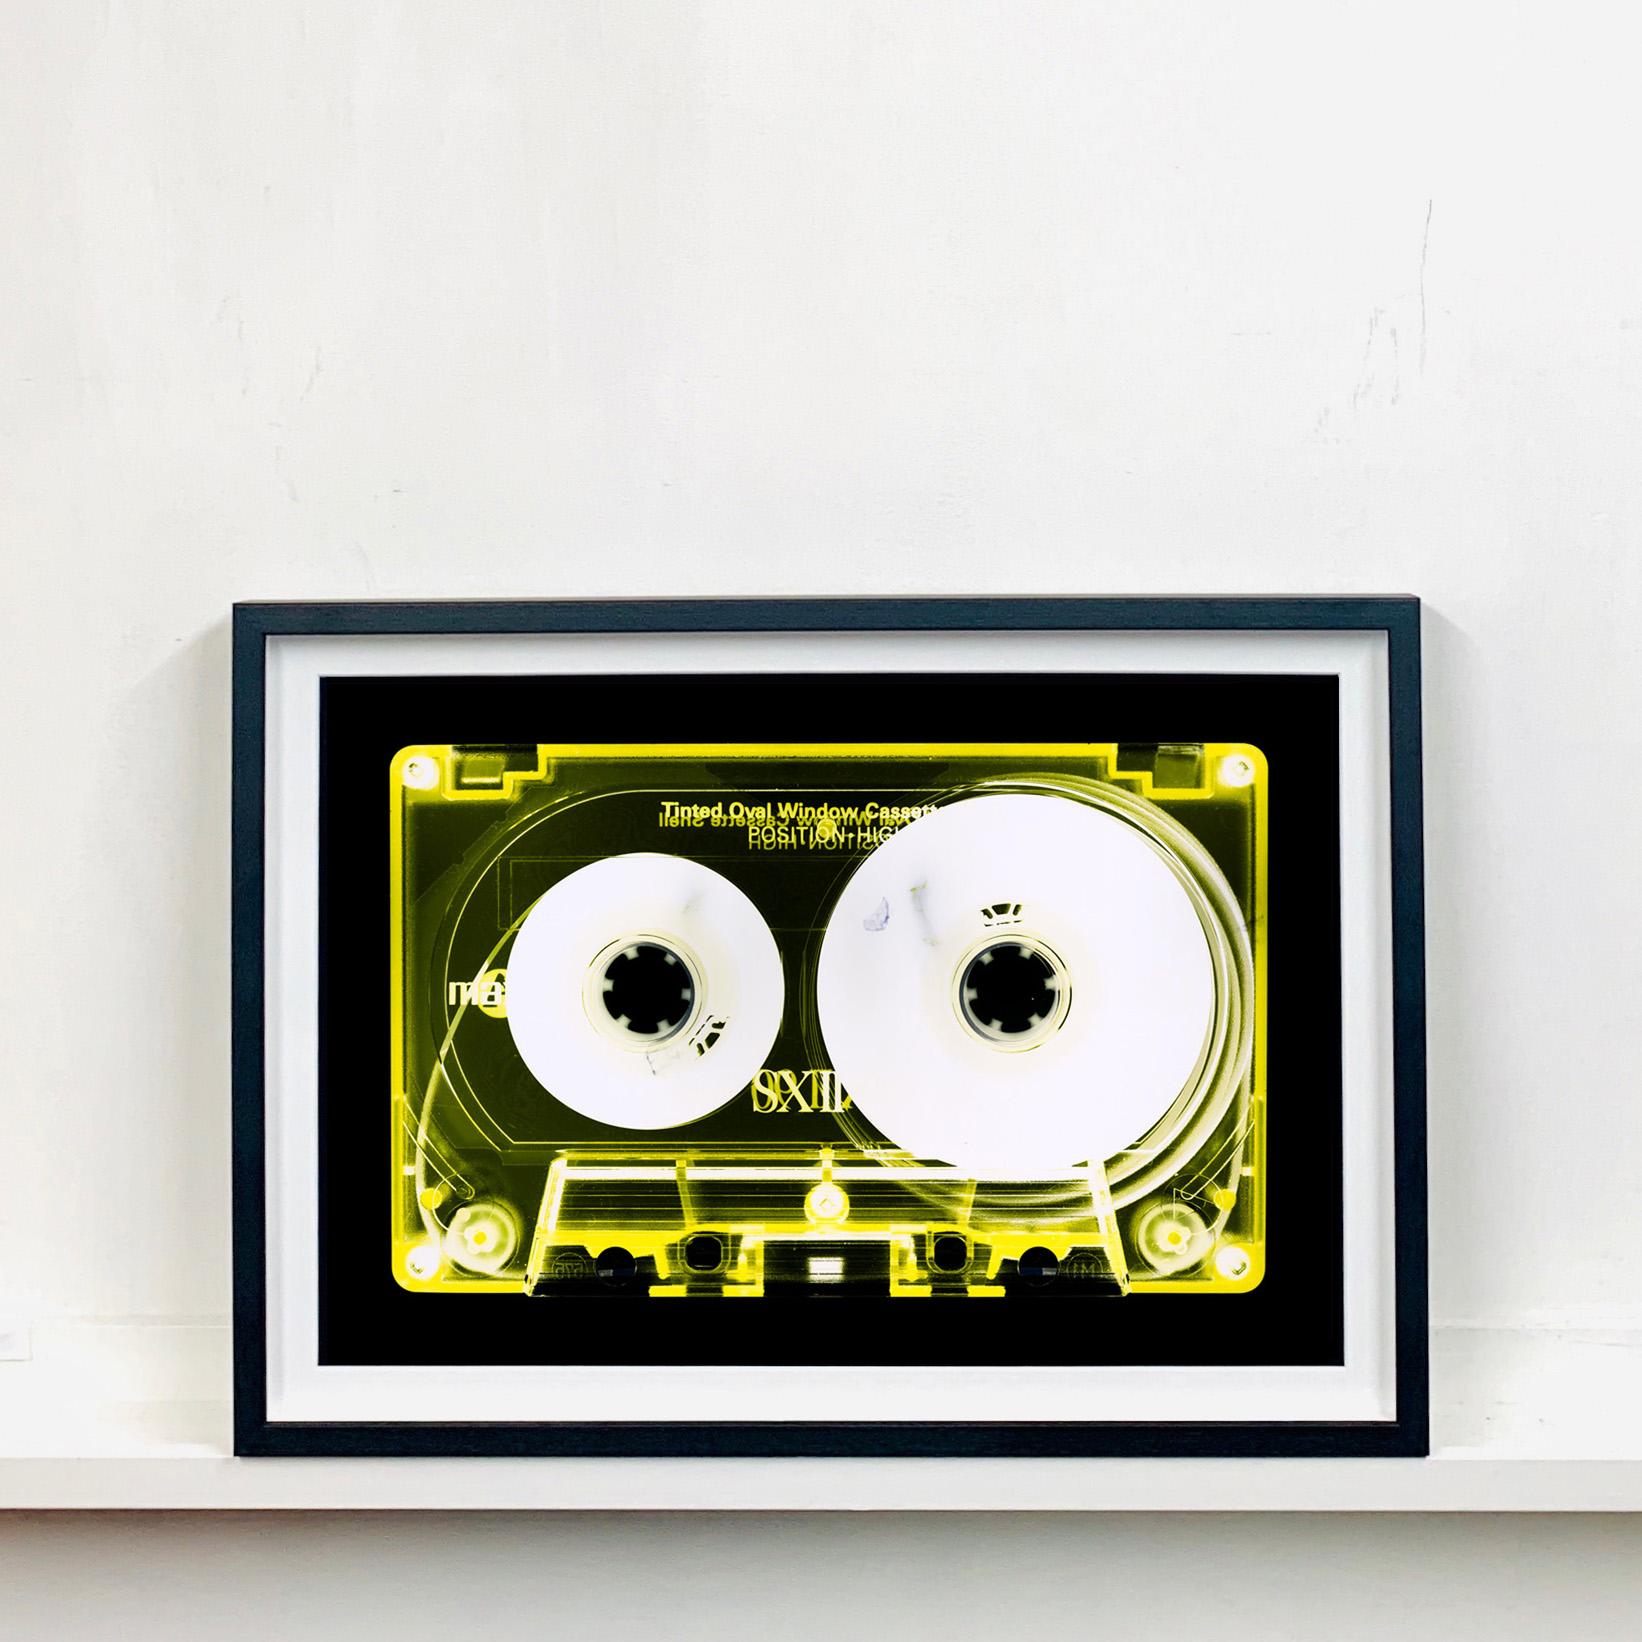 Yellow Tinted Cassette from the Heidler & Heeps Tape Collection.
The Heidler & Heeps collaborations are creative representations of Natasha Heidler and Richard Heeps’, personal past and their personalities. Tapes are significant in both their lives